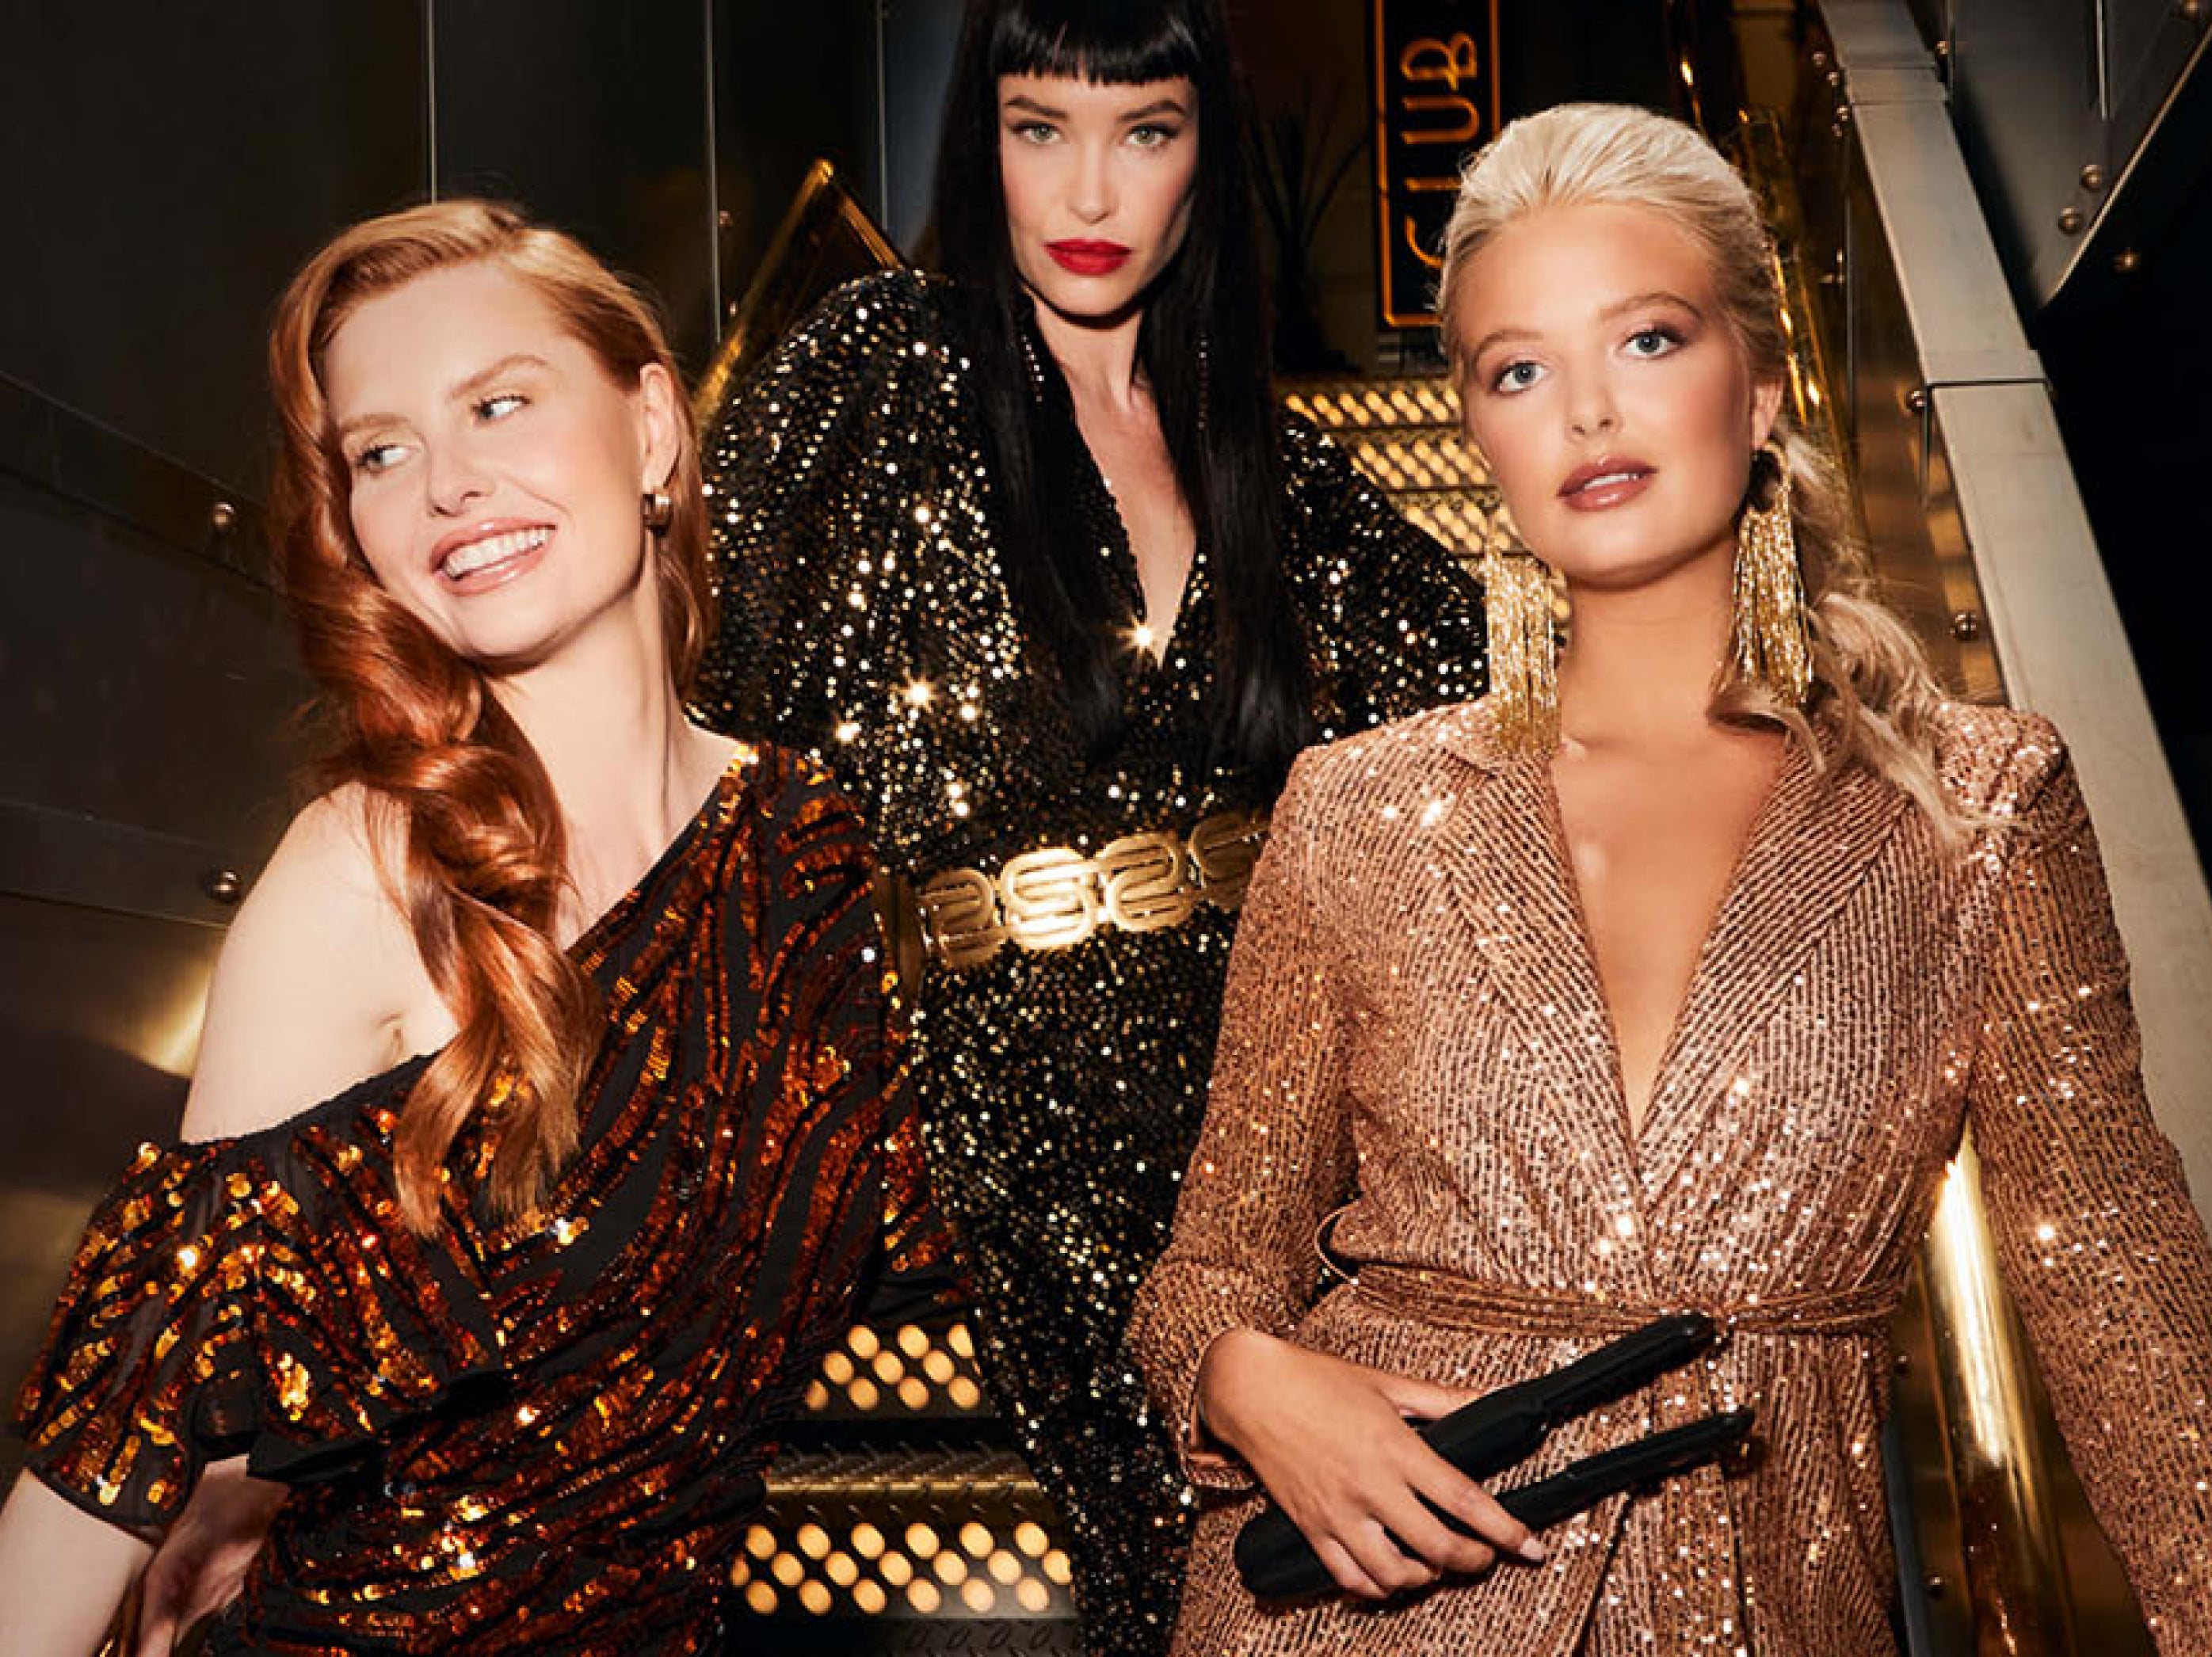 three models, one ginger, one jet black hair, one blonde in sequined outfits posing on a staircase 